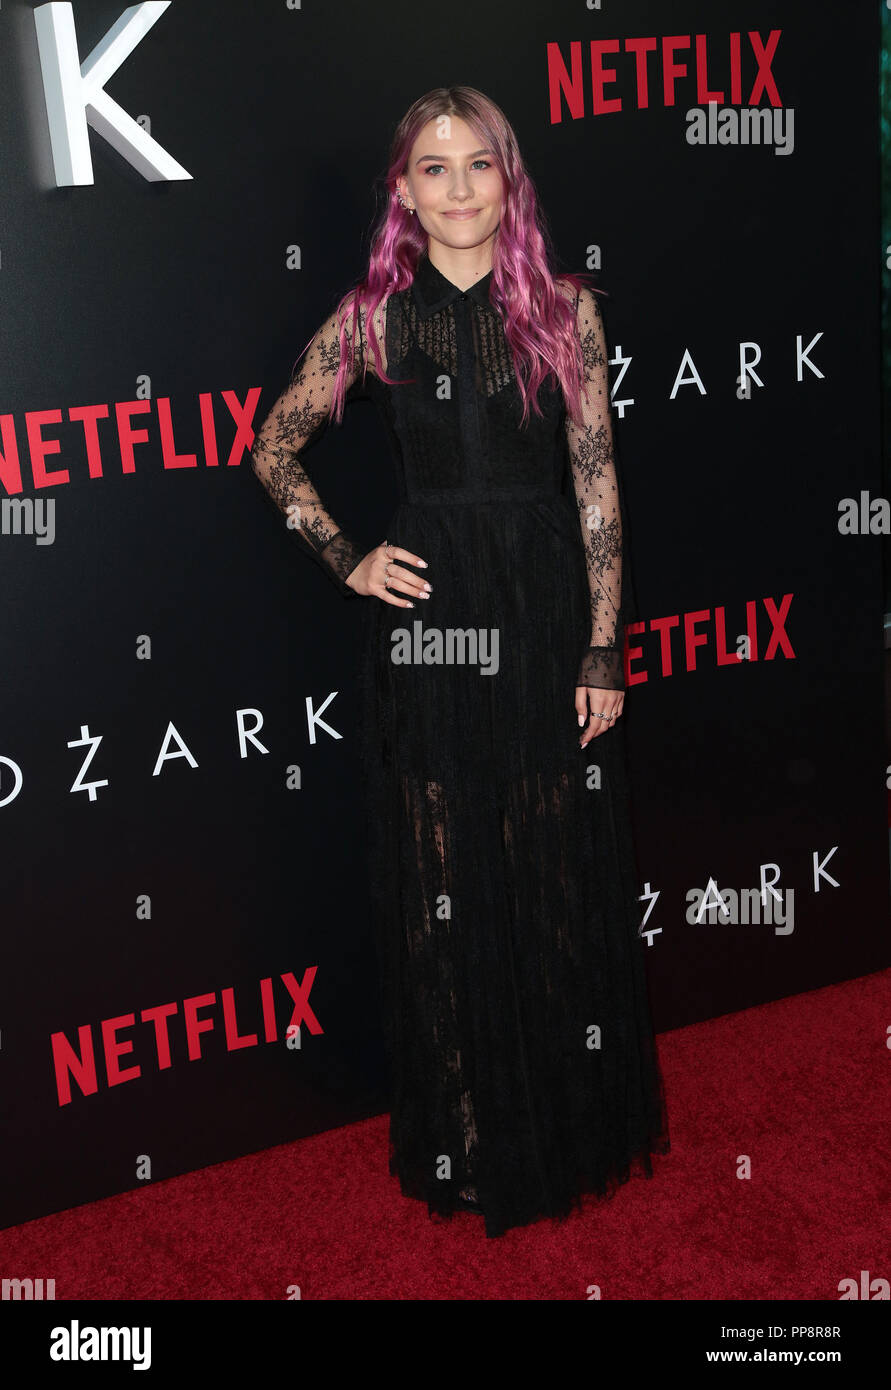 Celebrities attend Netflix's Ozark Season 2 Special Screening at Arclight Hollywood.  Featuring: Sofia Hublitz Where: Beverly Hills, California, United States When: 23 Aug 2018 Credit: Brian To/WENN.com Stock Photo